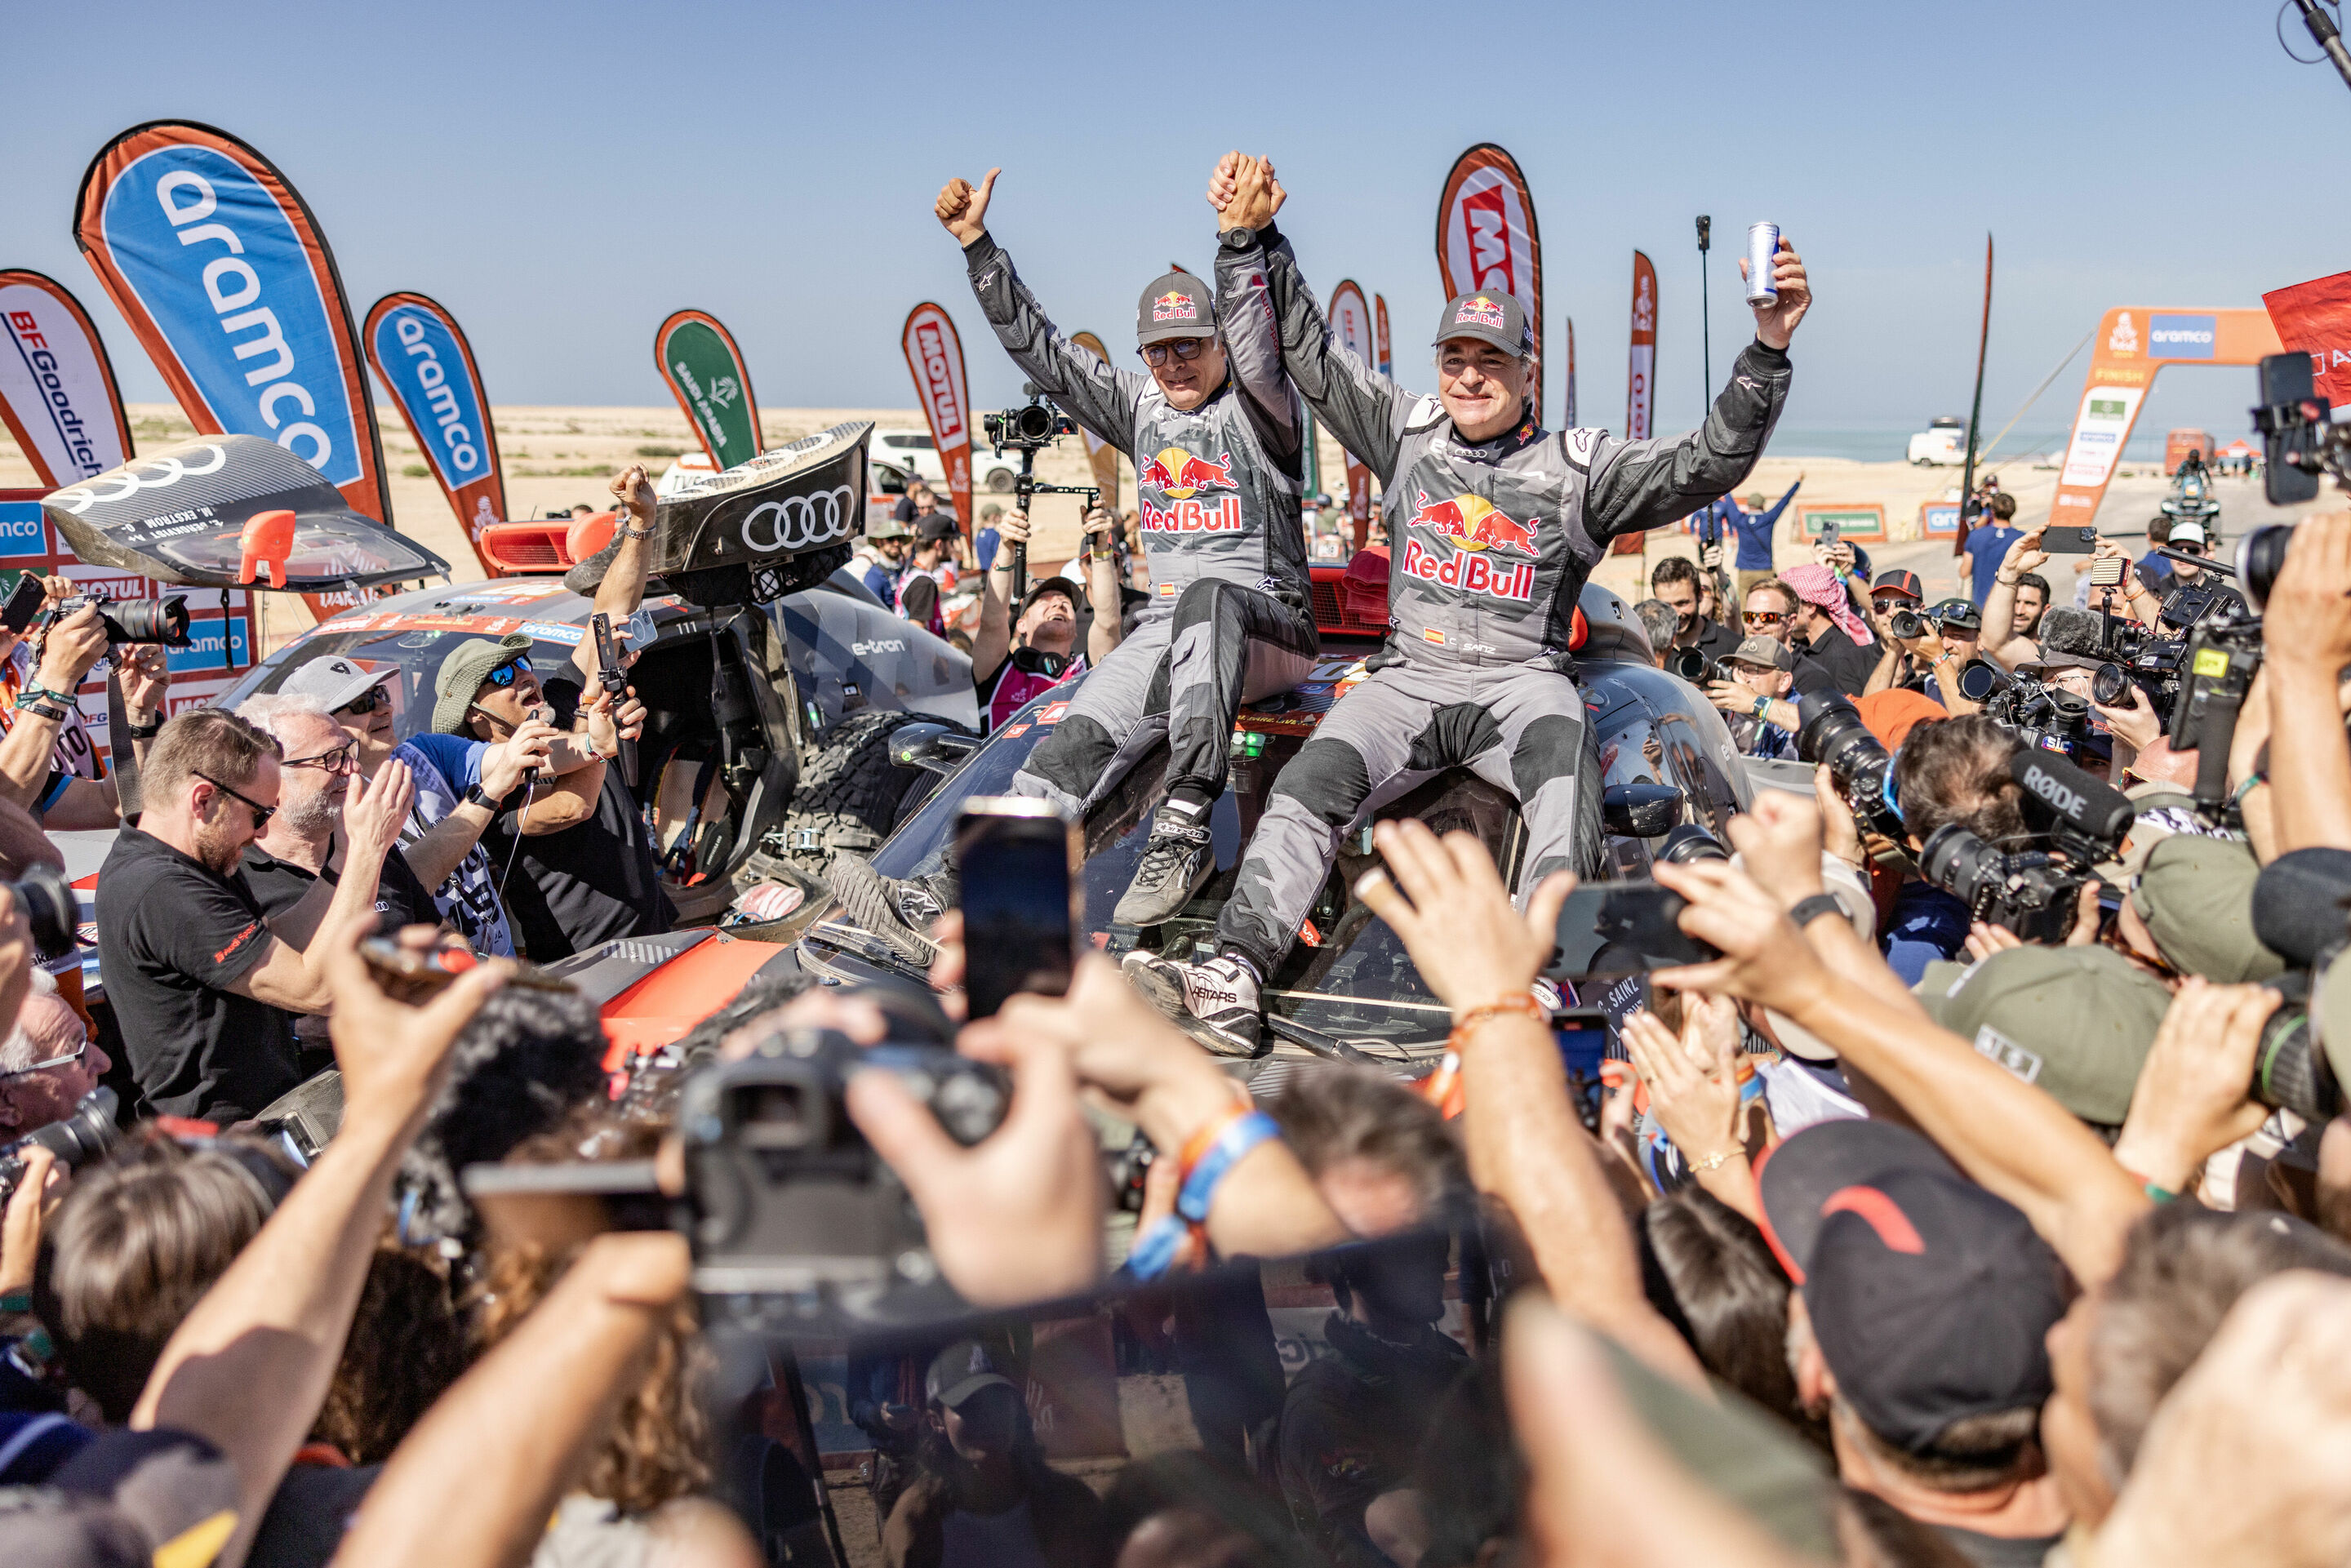 Facts and figures on Audi's Dakar victory